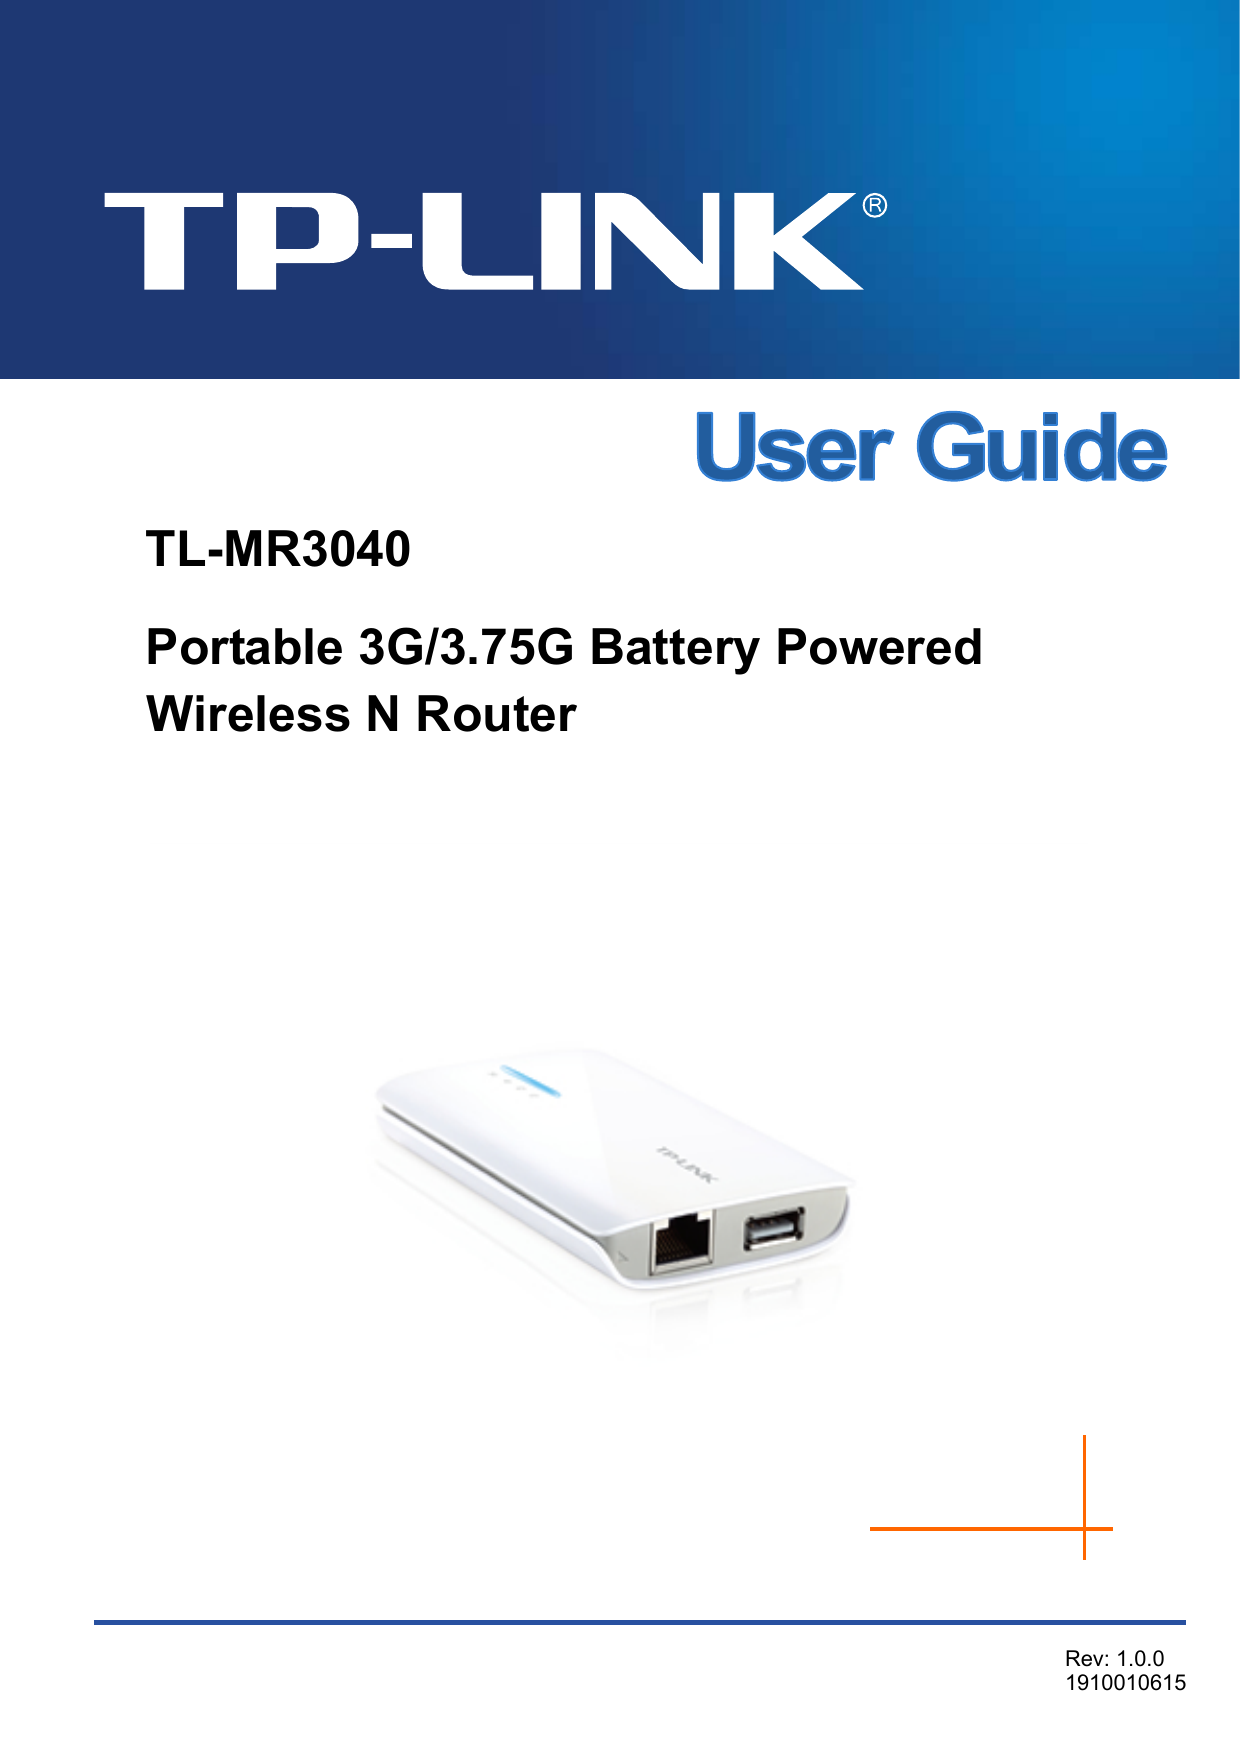   TL-MR3040 Portable 3G/3.75G Battery Powered Wireless N Router    Rev: 1.0.0 1910010615   